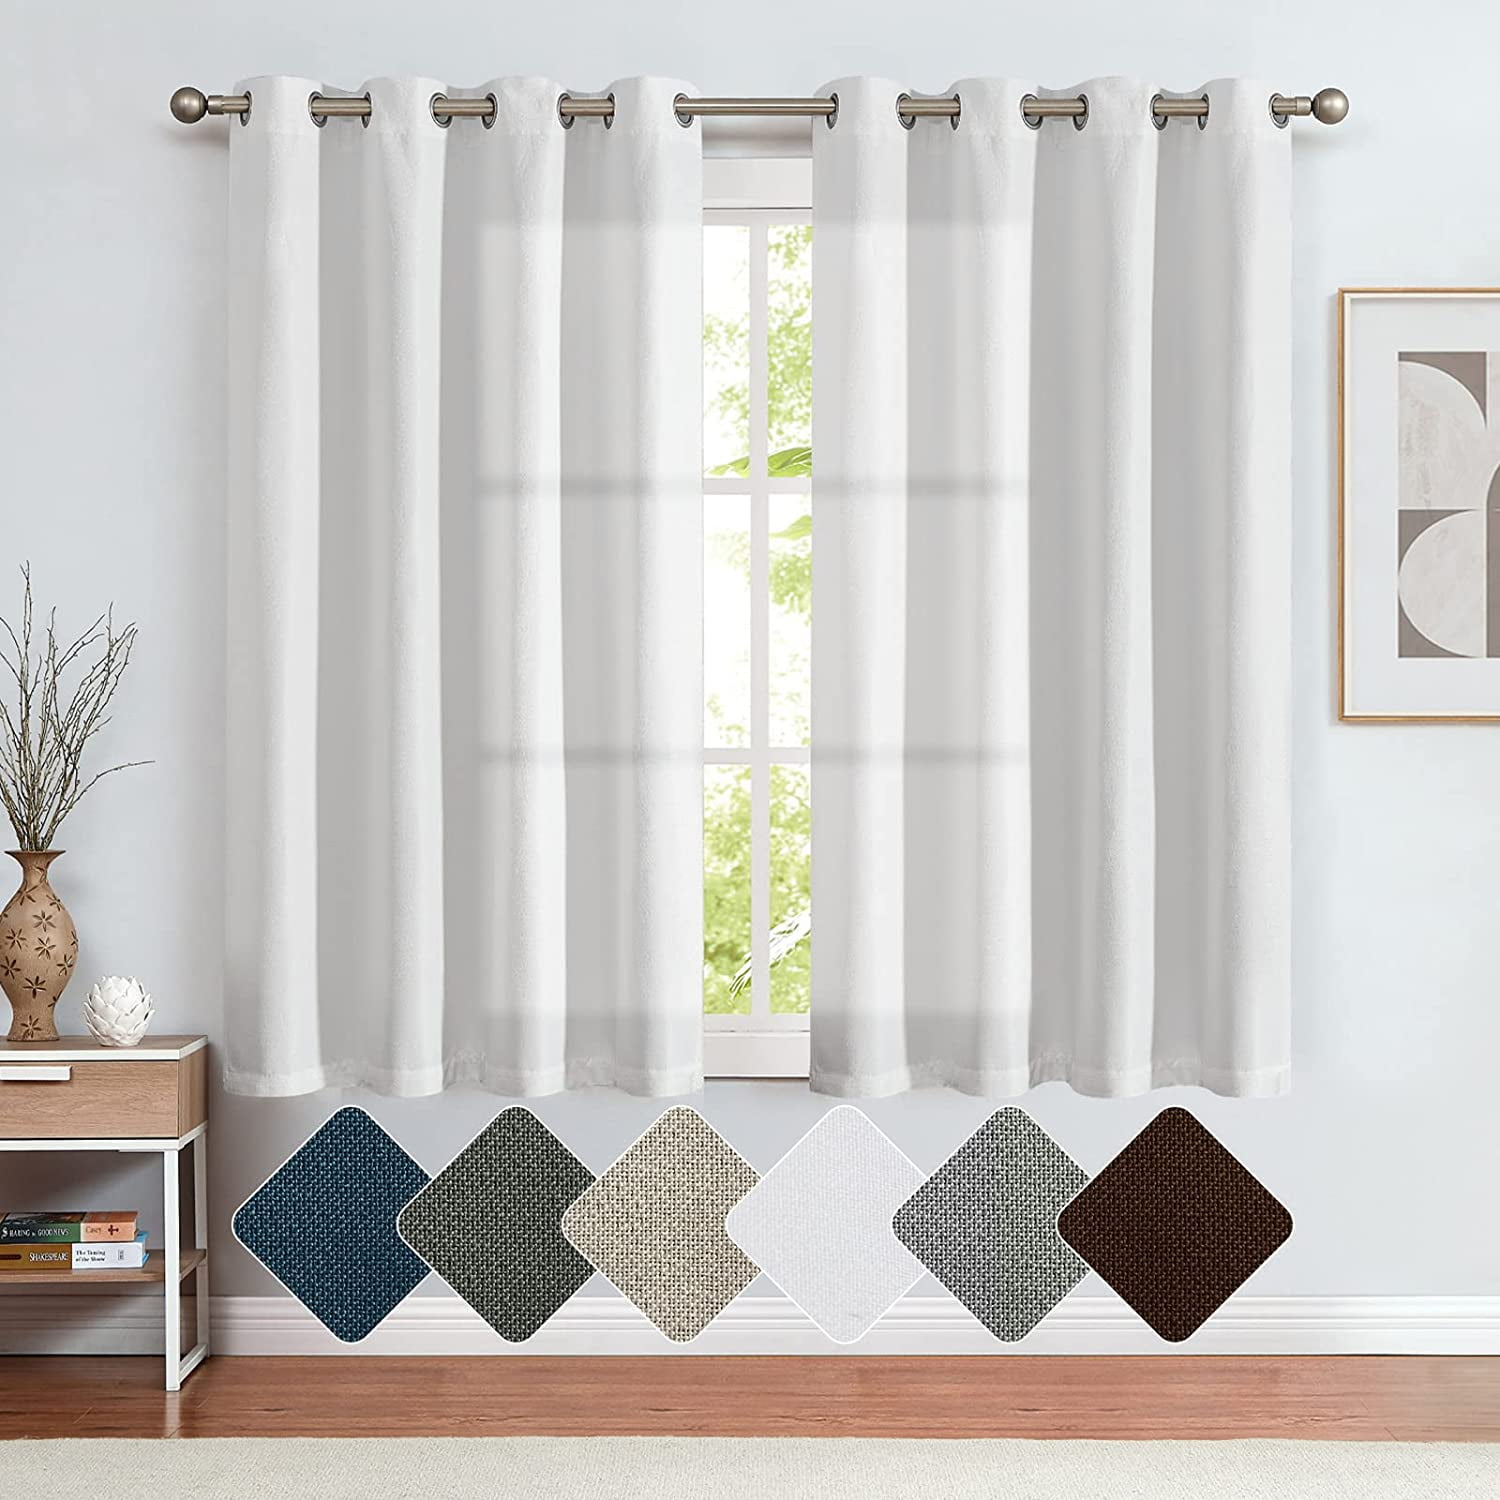 jinchan Thermal Insulated Faux Linen Room Darkening Curtains for Bedroom 63 